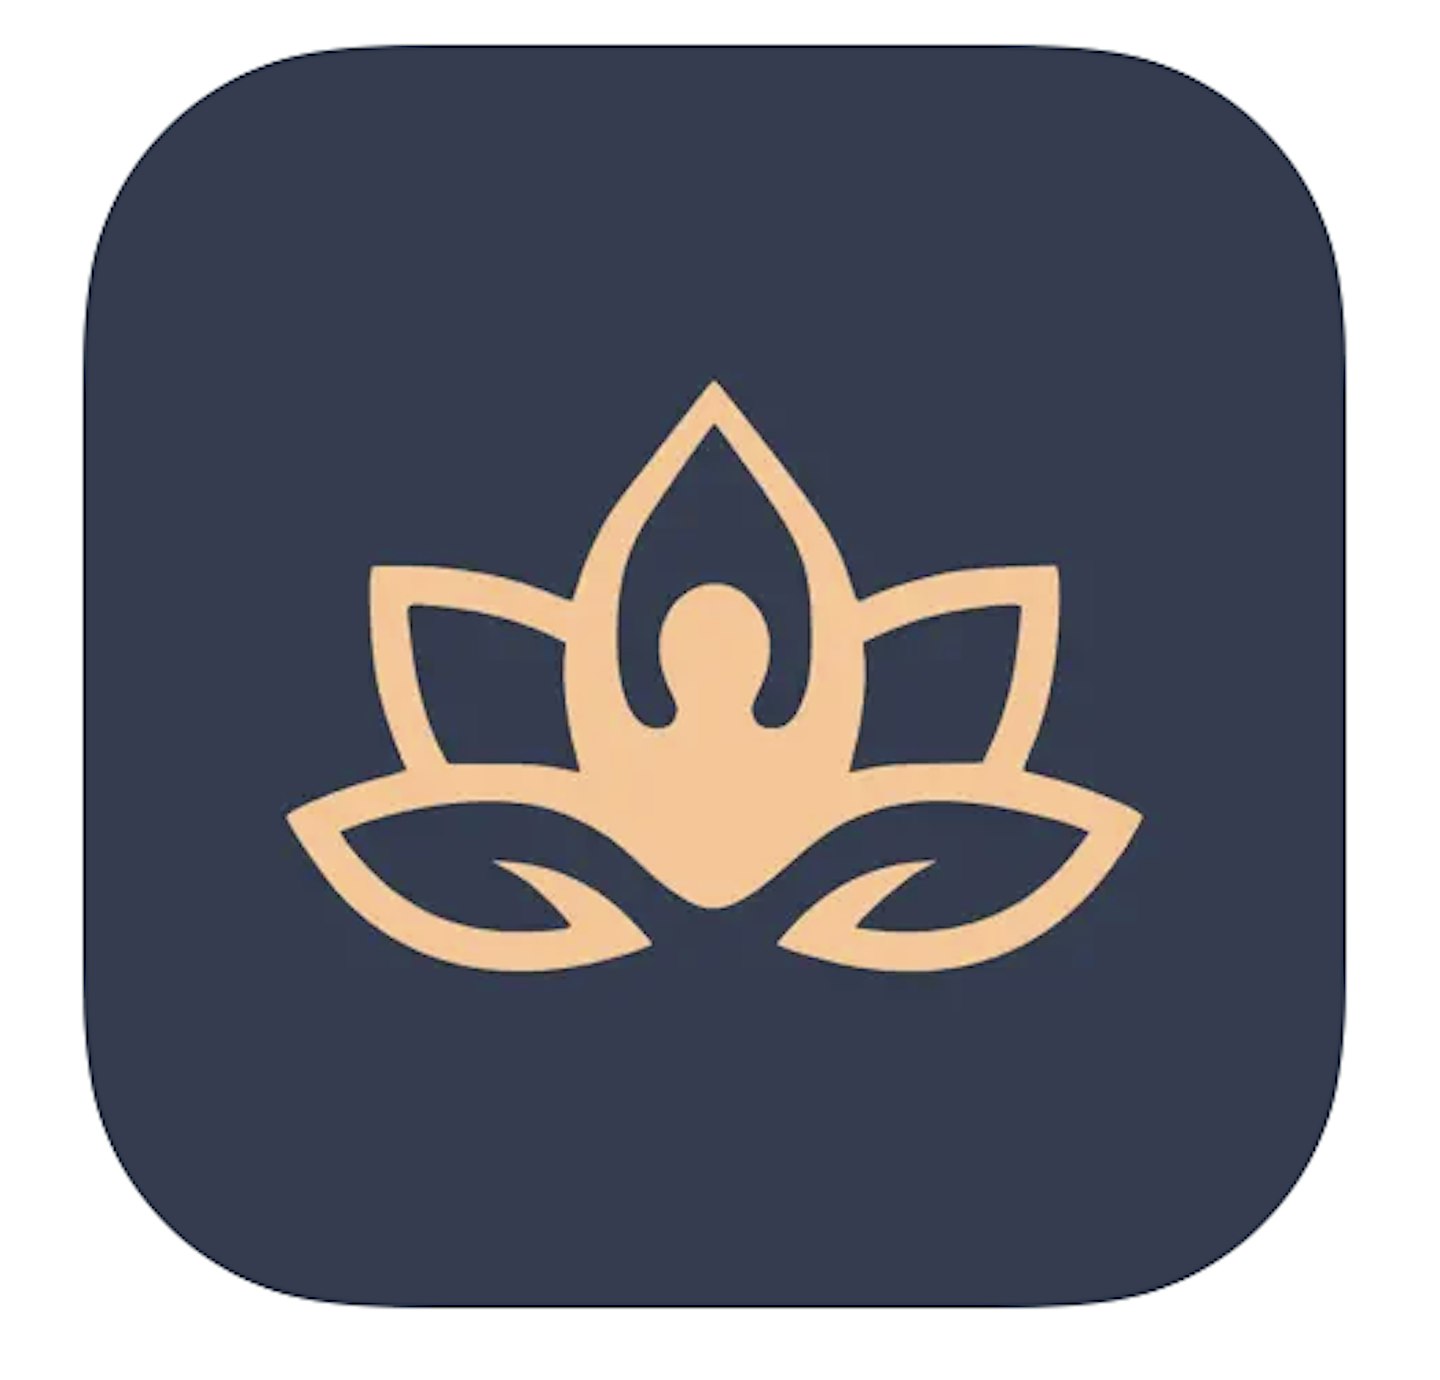 11 Best Free Yoga Apps Of 2022